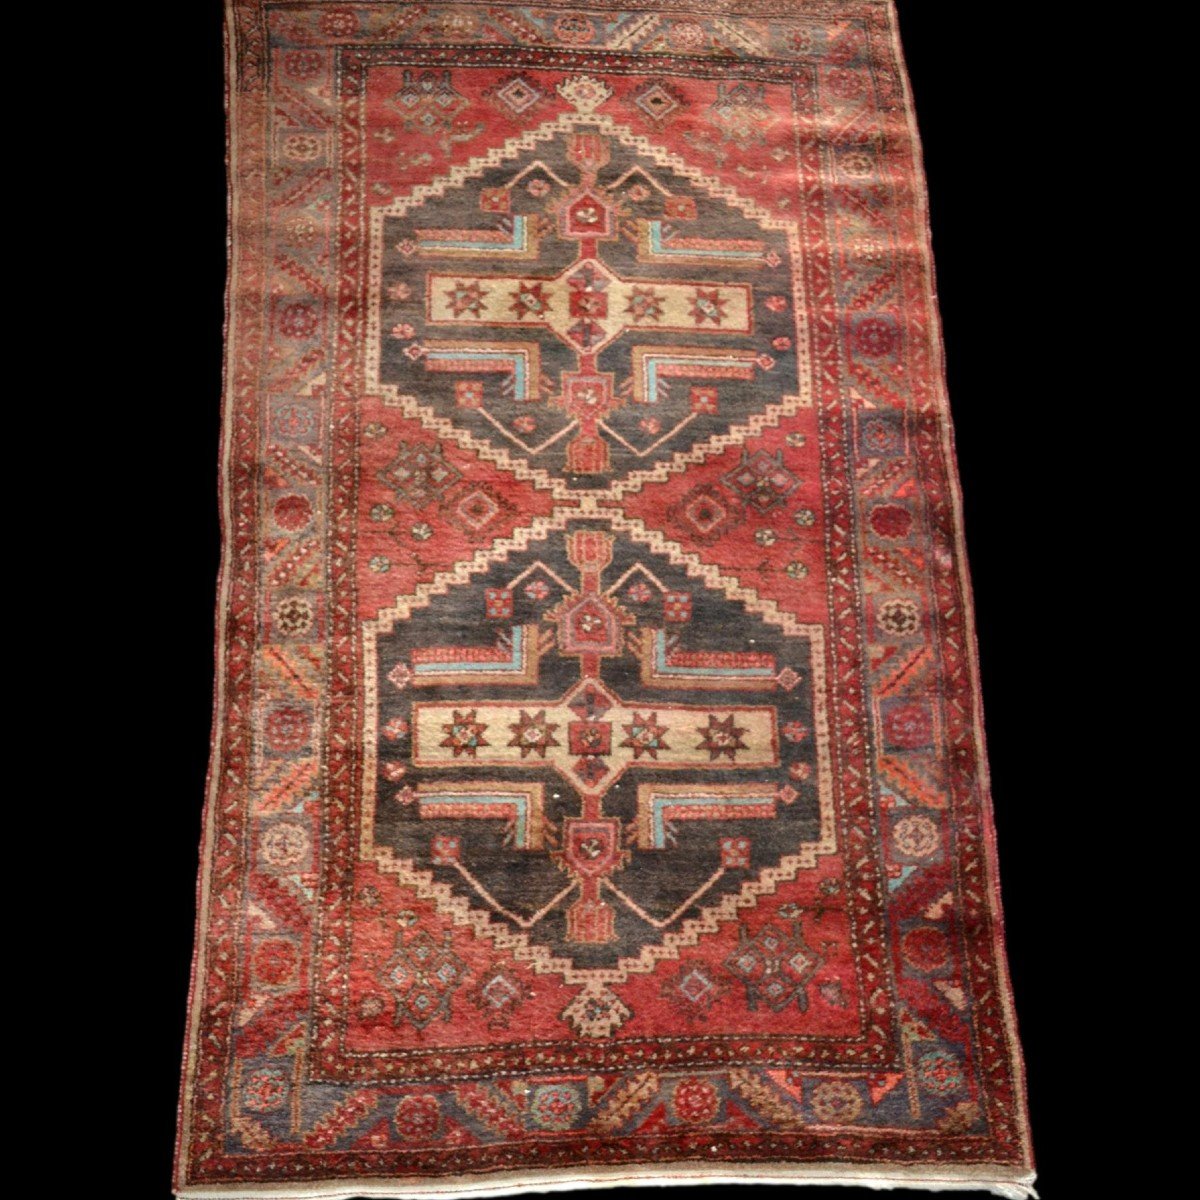 Hamadan, Persian, 125 Cm X 216 Cm, Hand-knotted Wool In Iran Around 1960, Good Condition